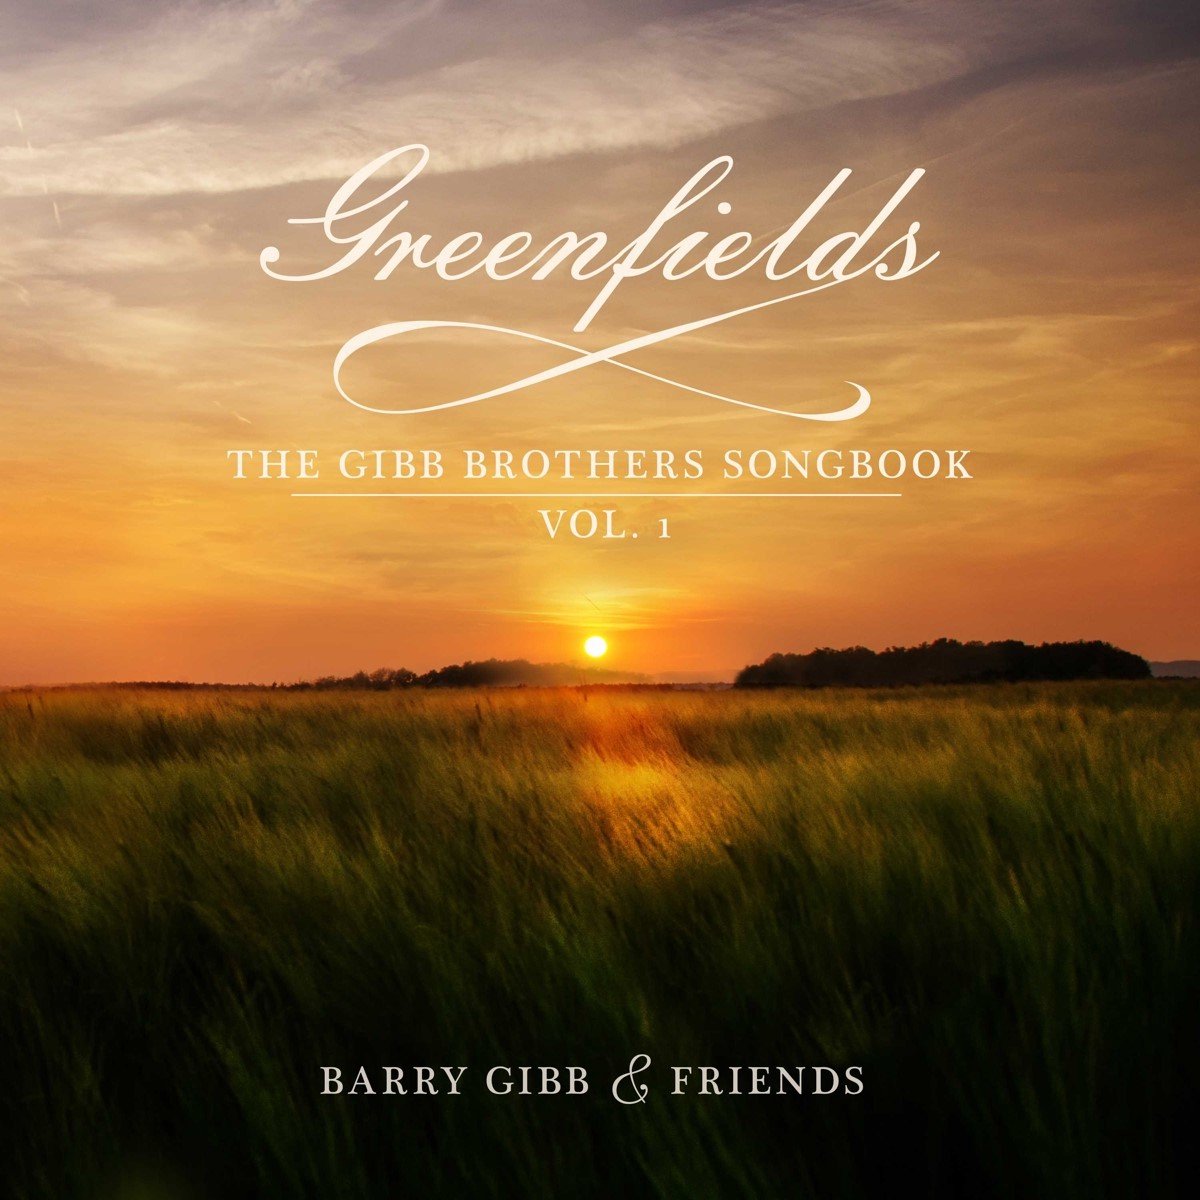 Barry Gibb - Greenfields: The Gibb Brothers' Songbook (CD) (Deluxe Edition) - Barry Gibb